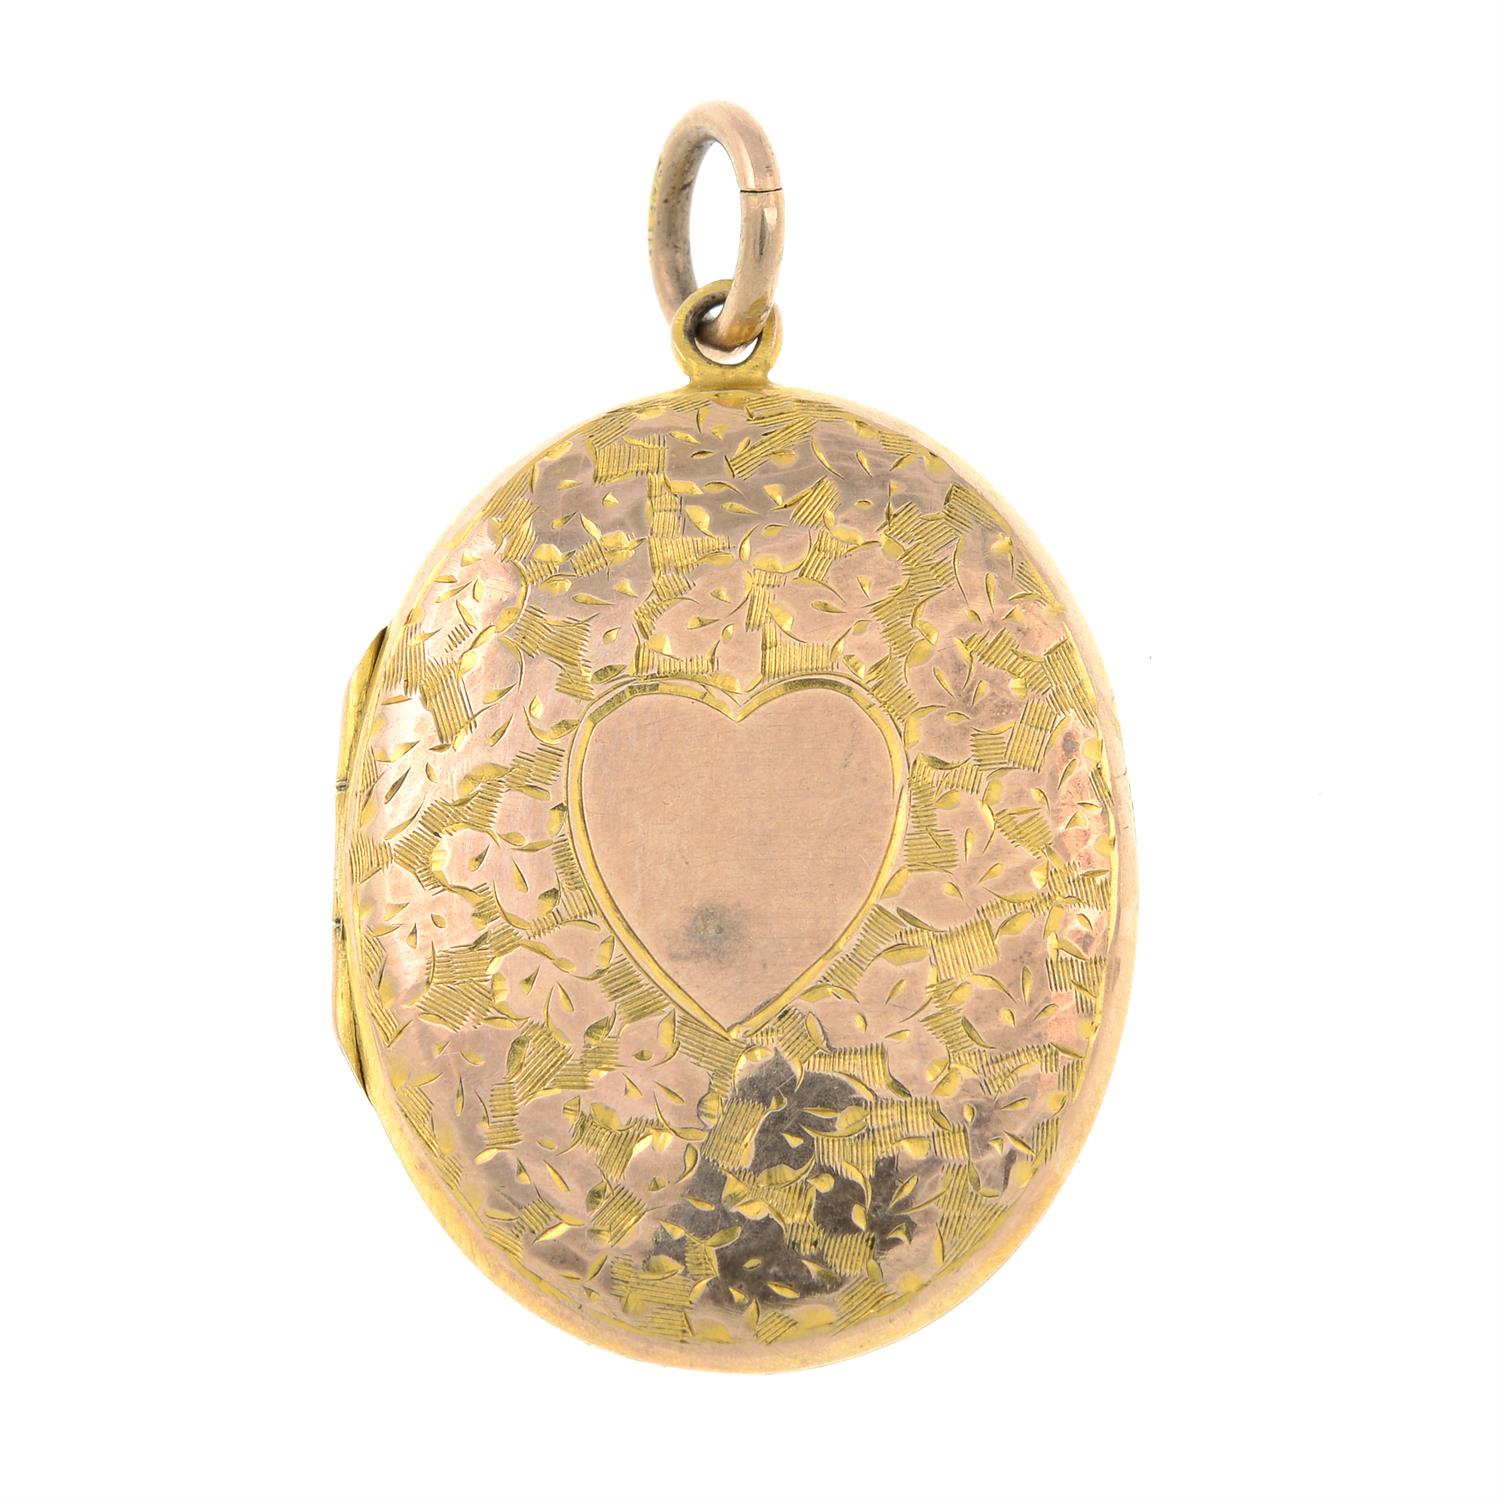 An early 20th century 9ct gold locket, with foliate motif.